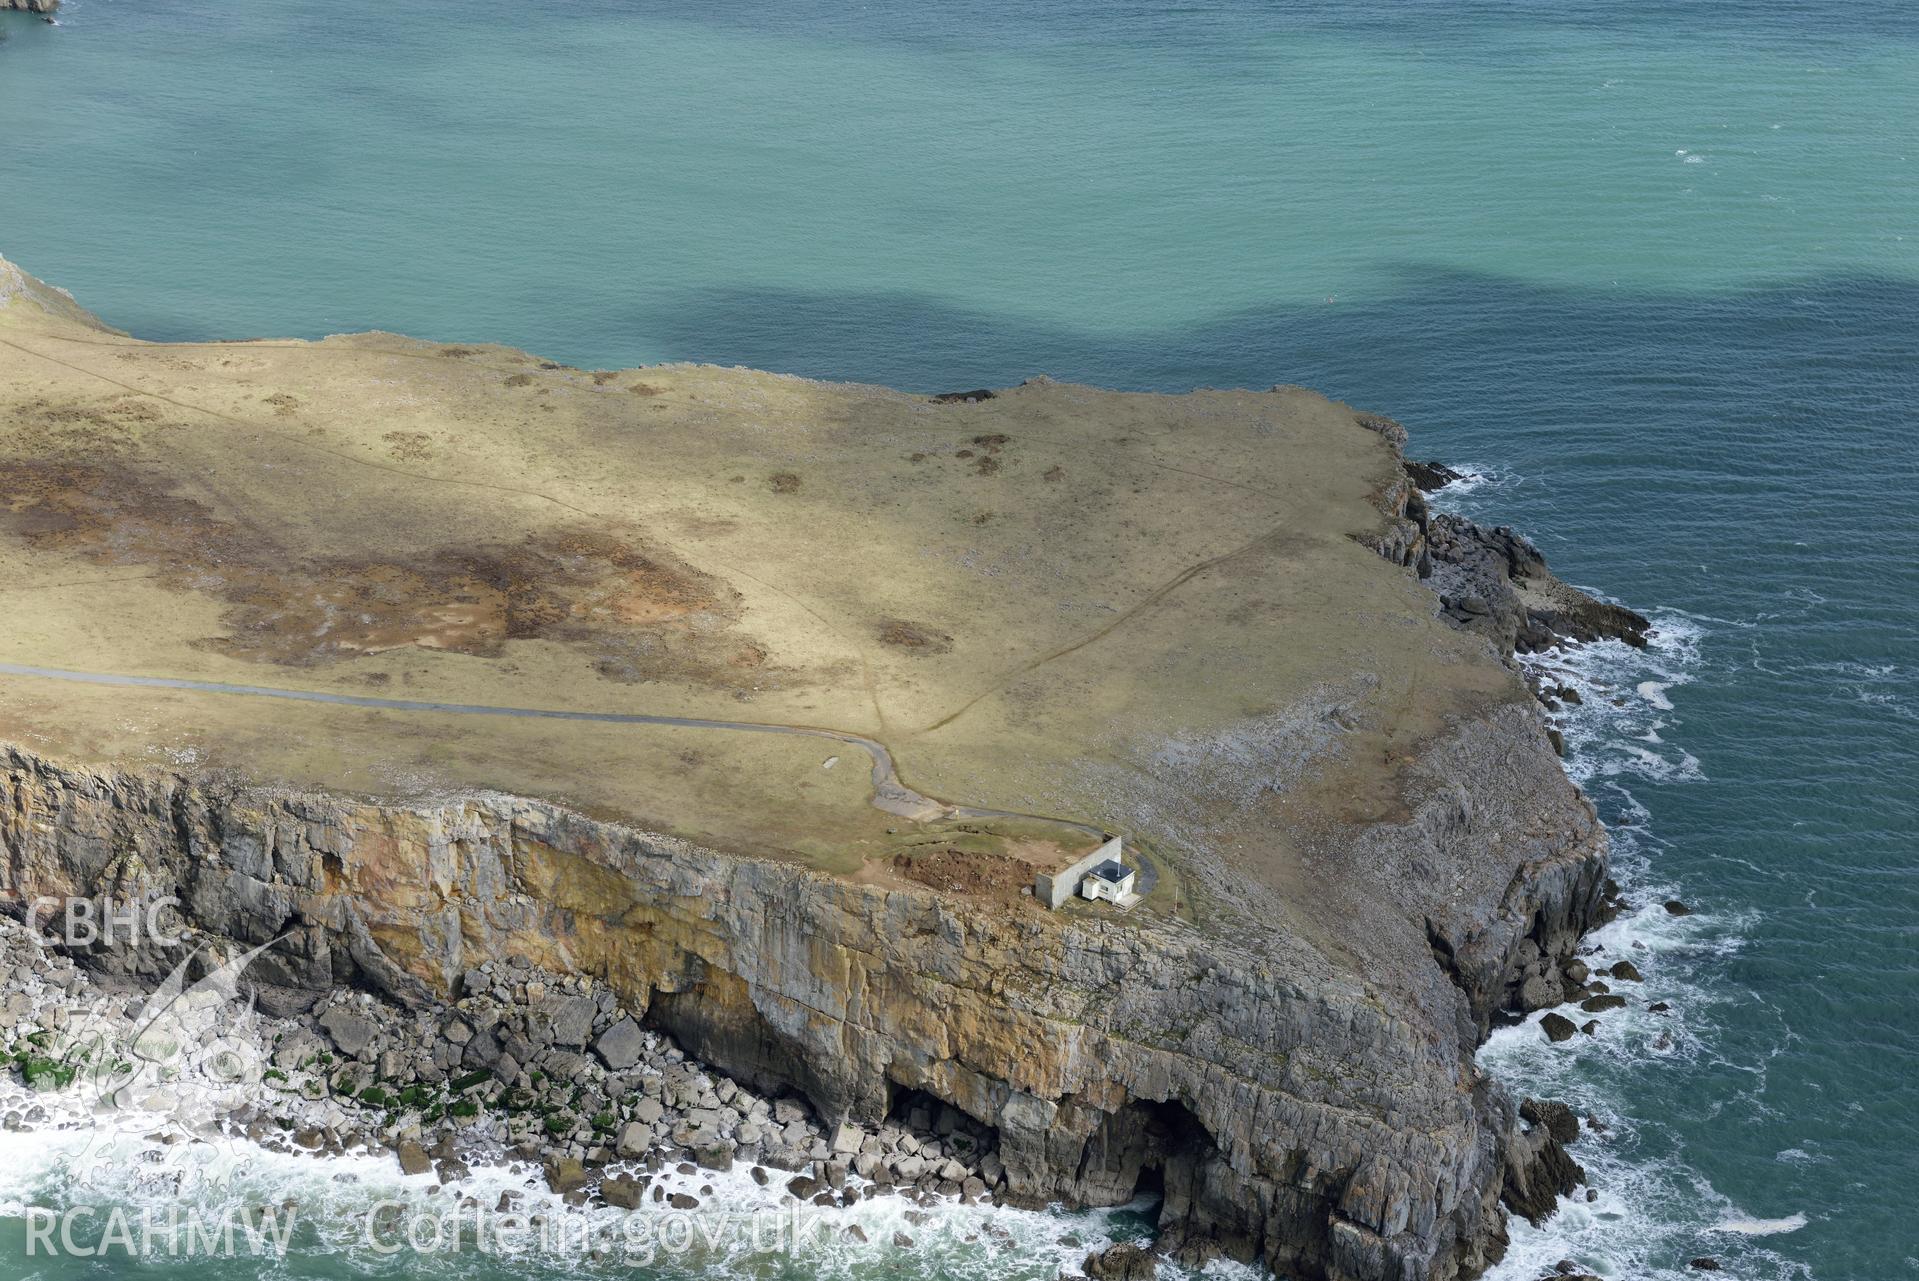 St Govans Head, Bosherton. Baseline aerial reconnaissance survey for the CHERISH Project. ? Crown: CHERISH PROJECT 2018. Produced with EU funds through the Ireland Wales Co-operation Programme 2014-2020. All material made freely available through the Open Government Licence.